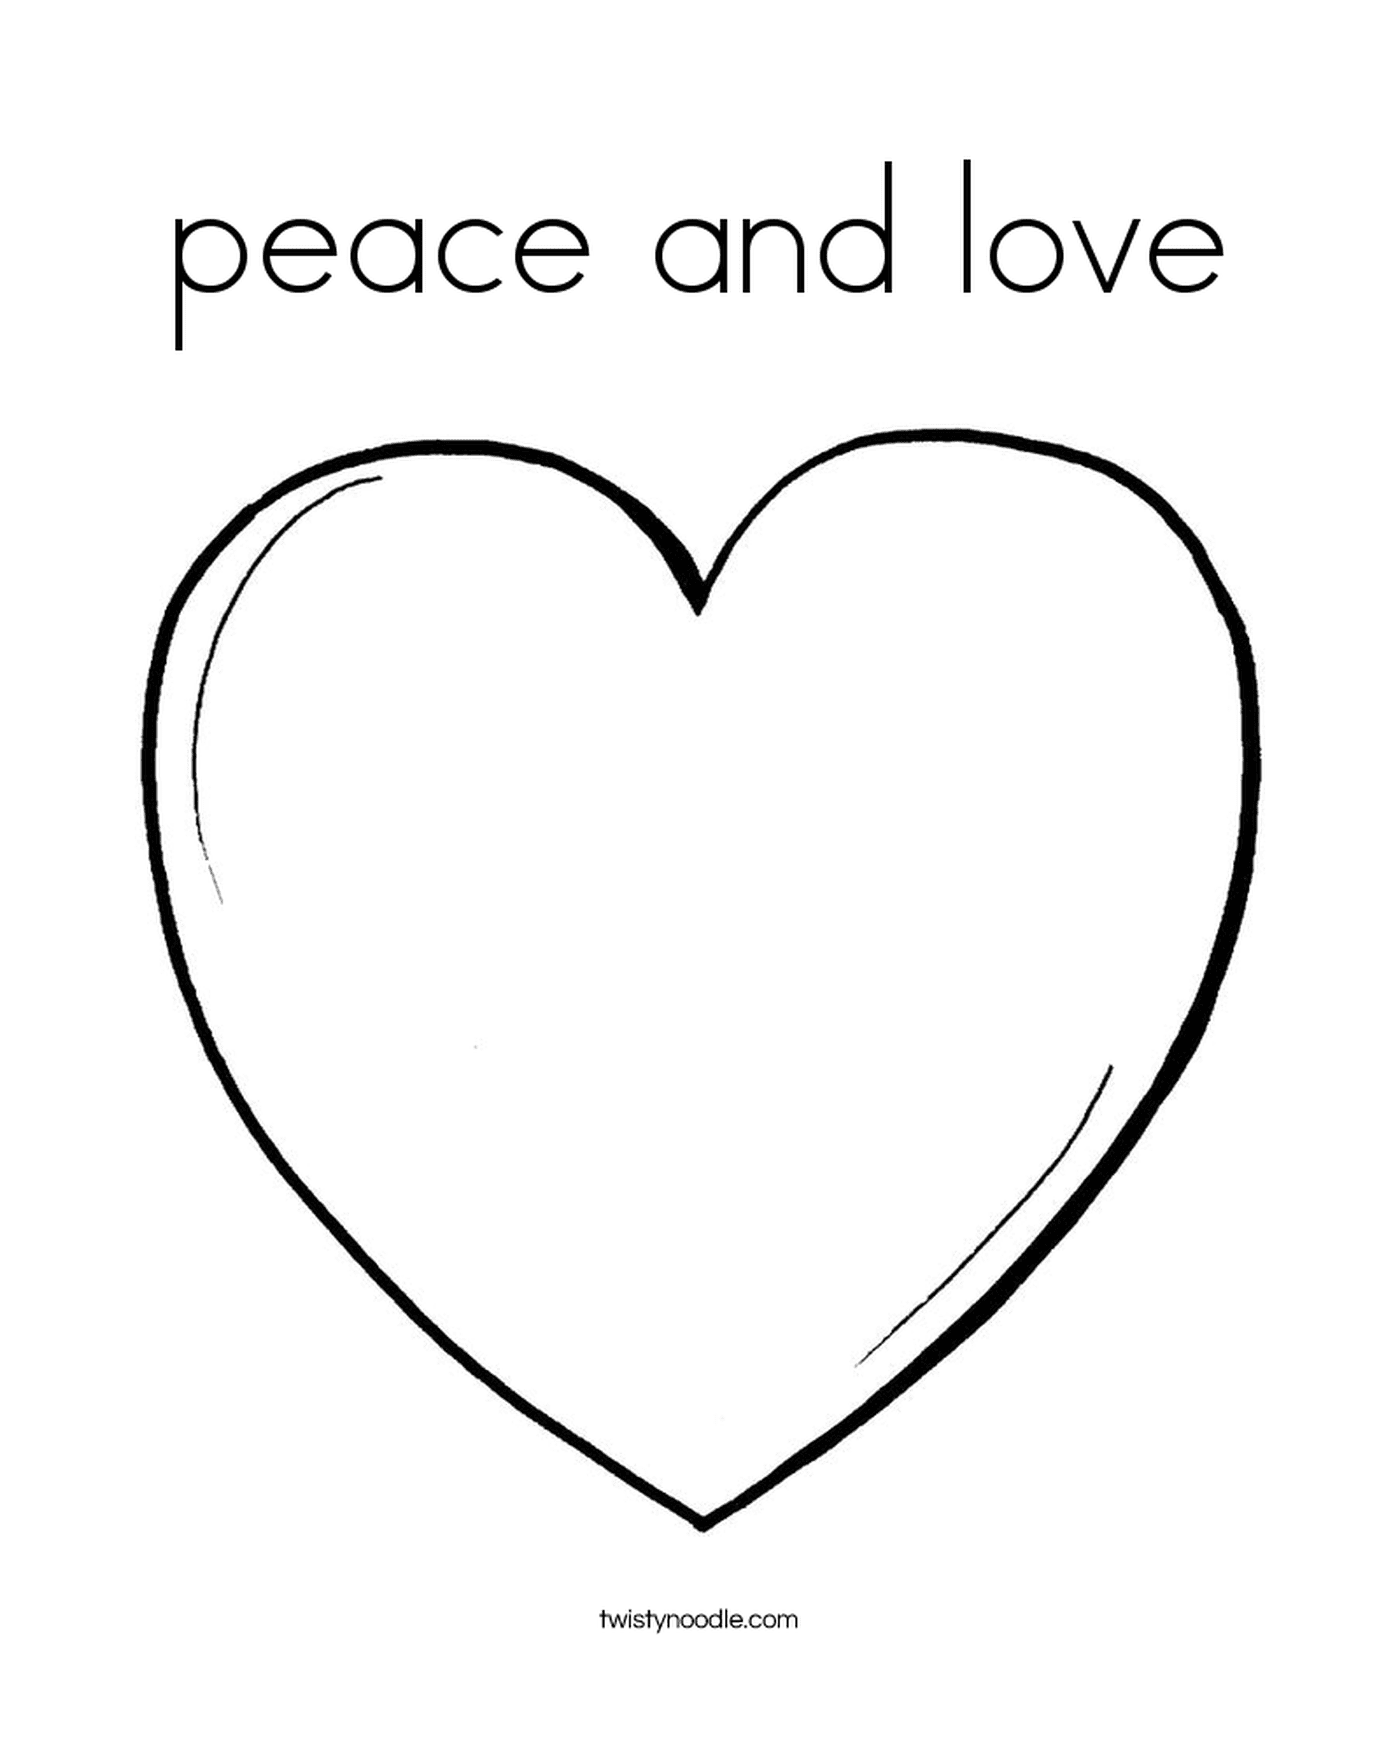  A heart of peace and love 